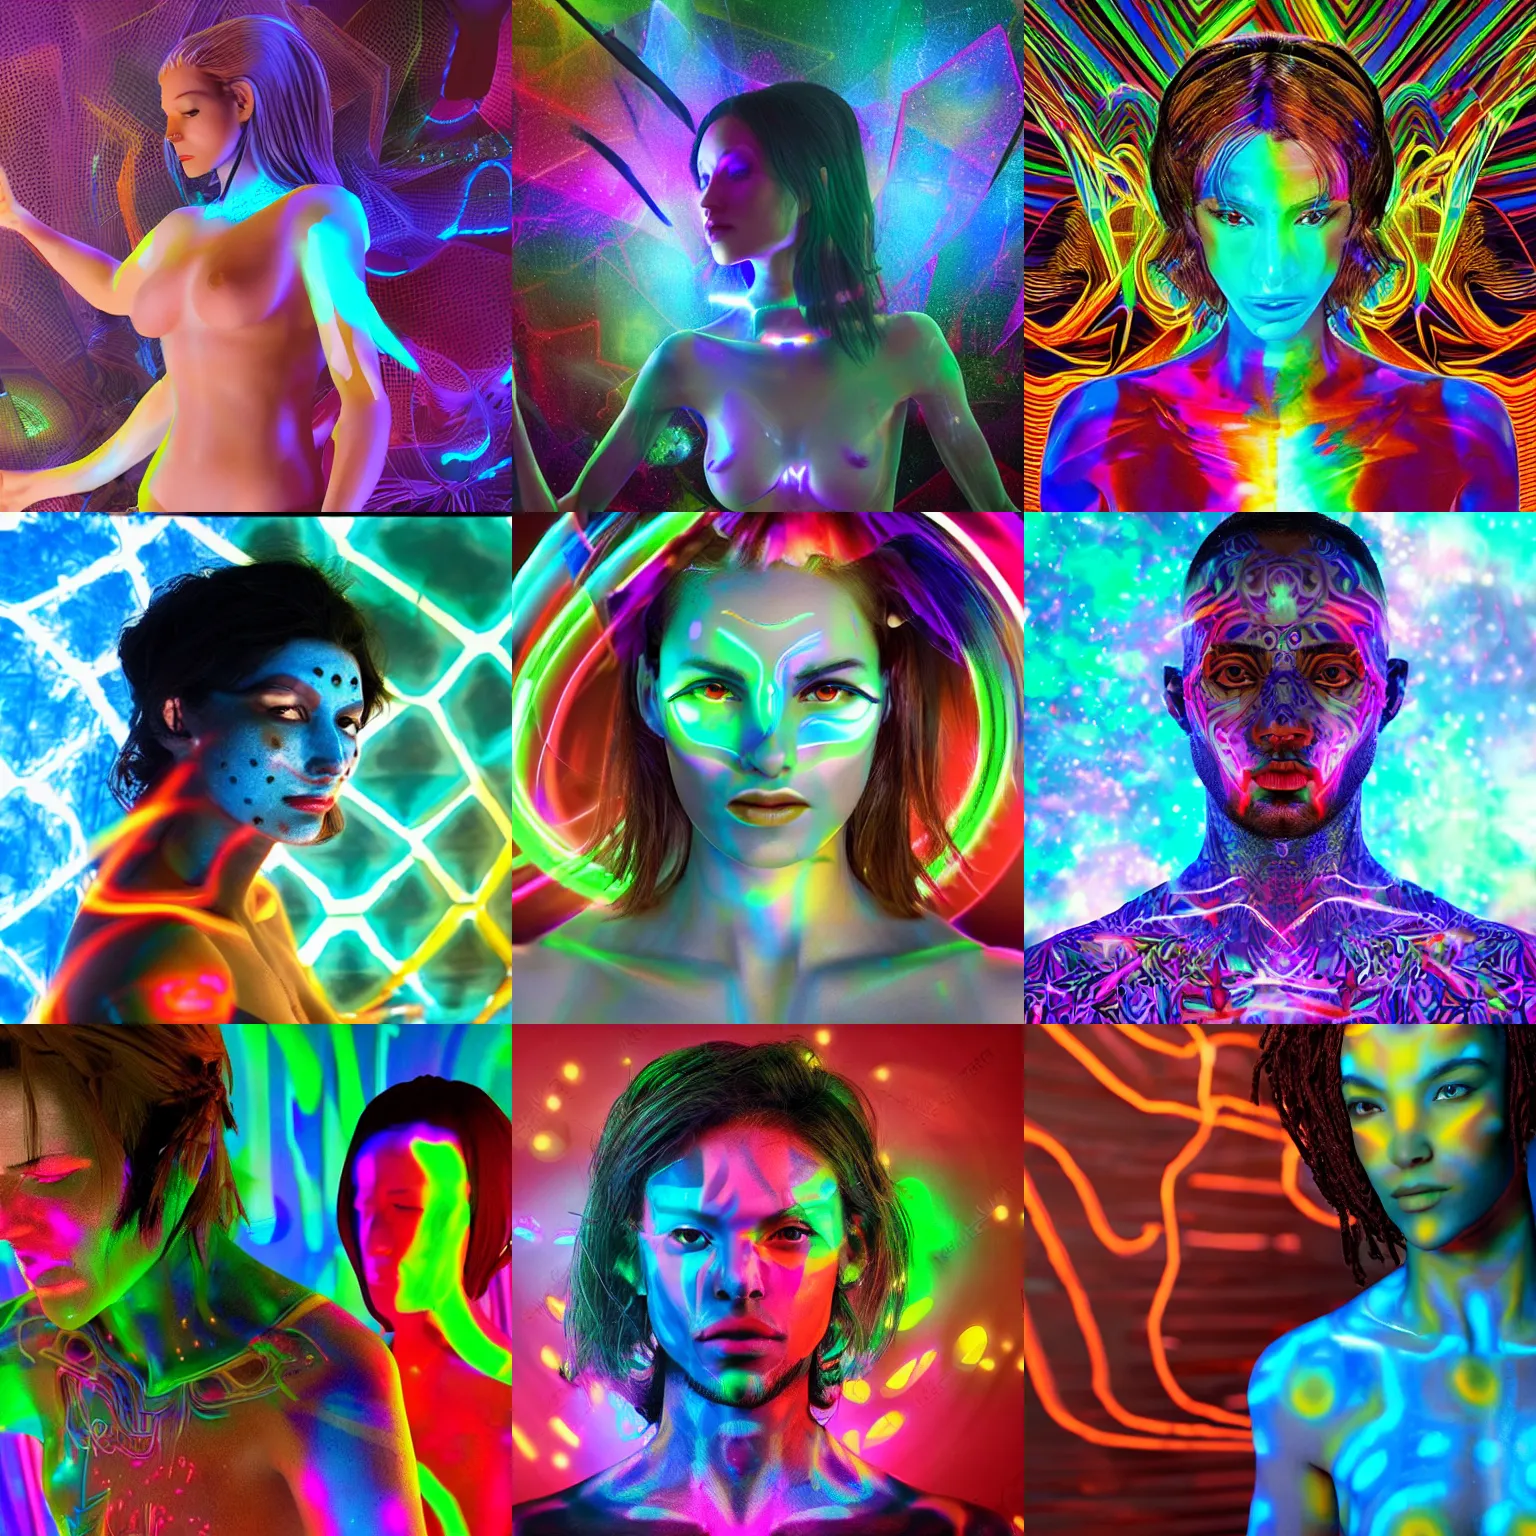 Prompt: sexy and beautiful angled shot of an extremely pretty and hot man or woman with dark or brown or light skin, with glowing painted psychedelic art covering his body. an avatar designed by an ai to represent his or her form to humans attractively